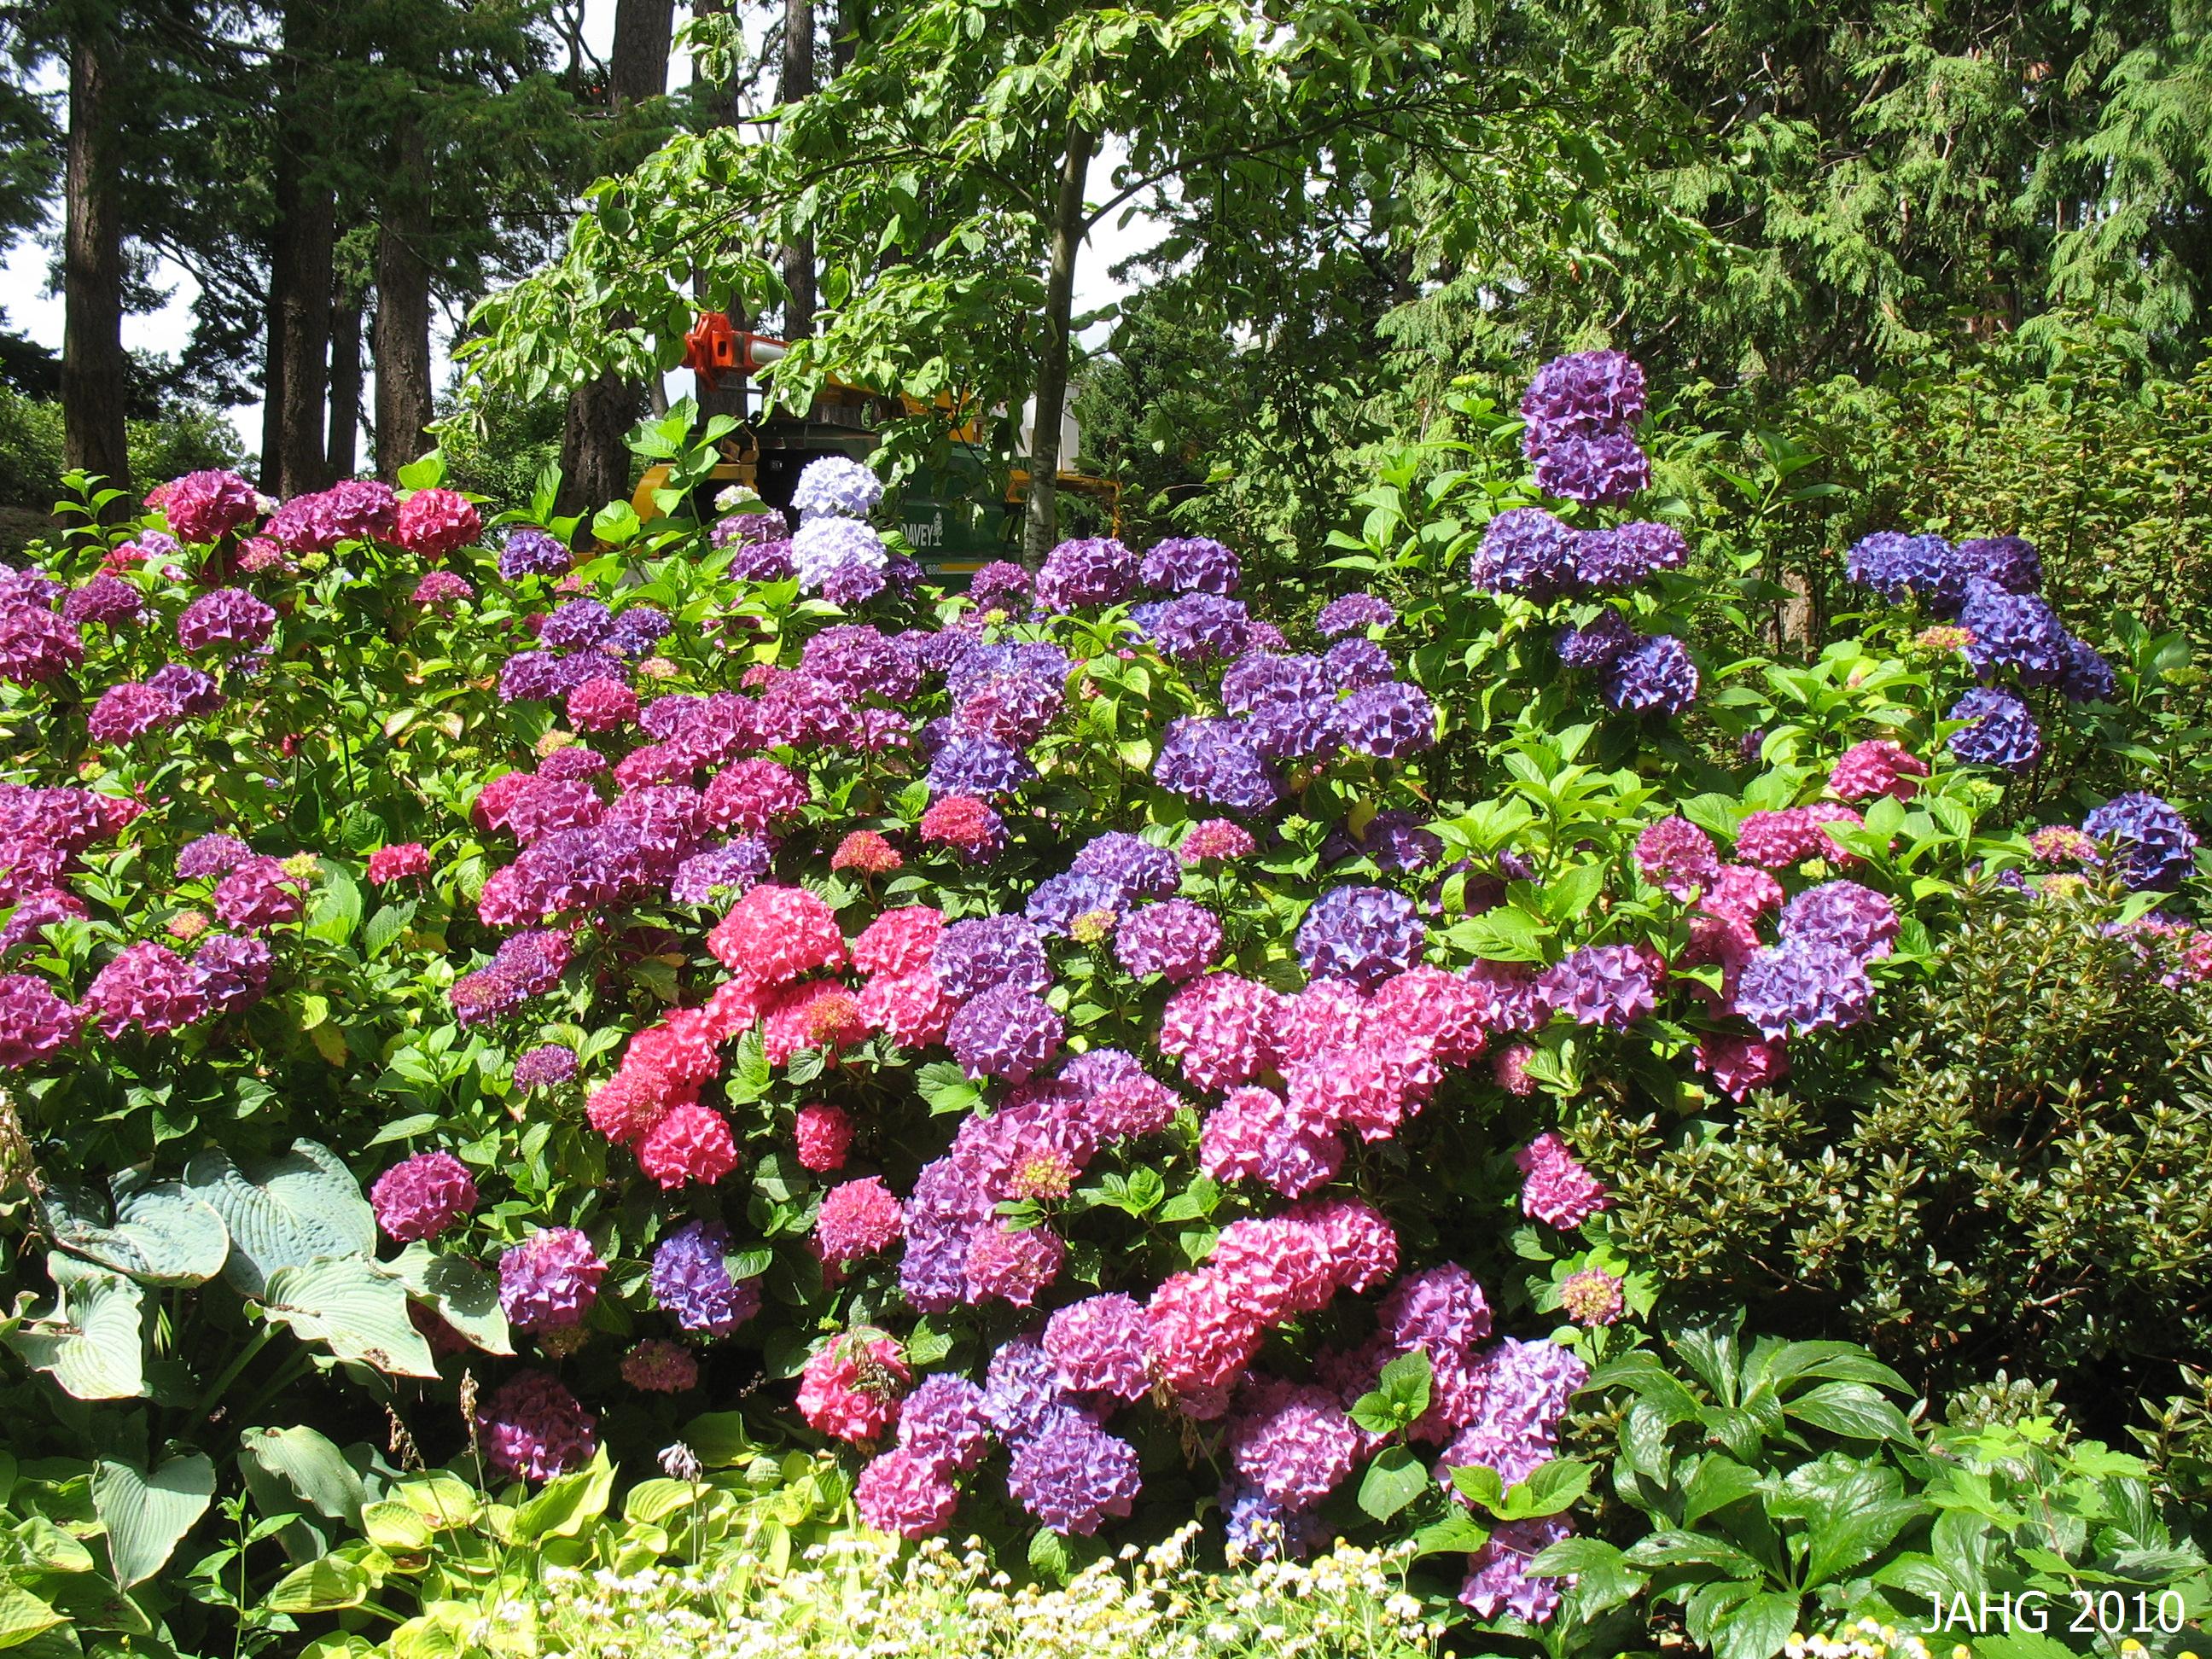  Hydrangea macrophylla border planting at Government House In Victoria